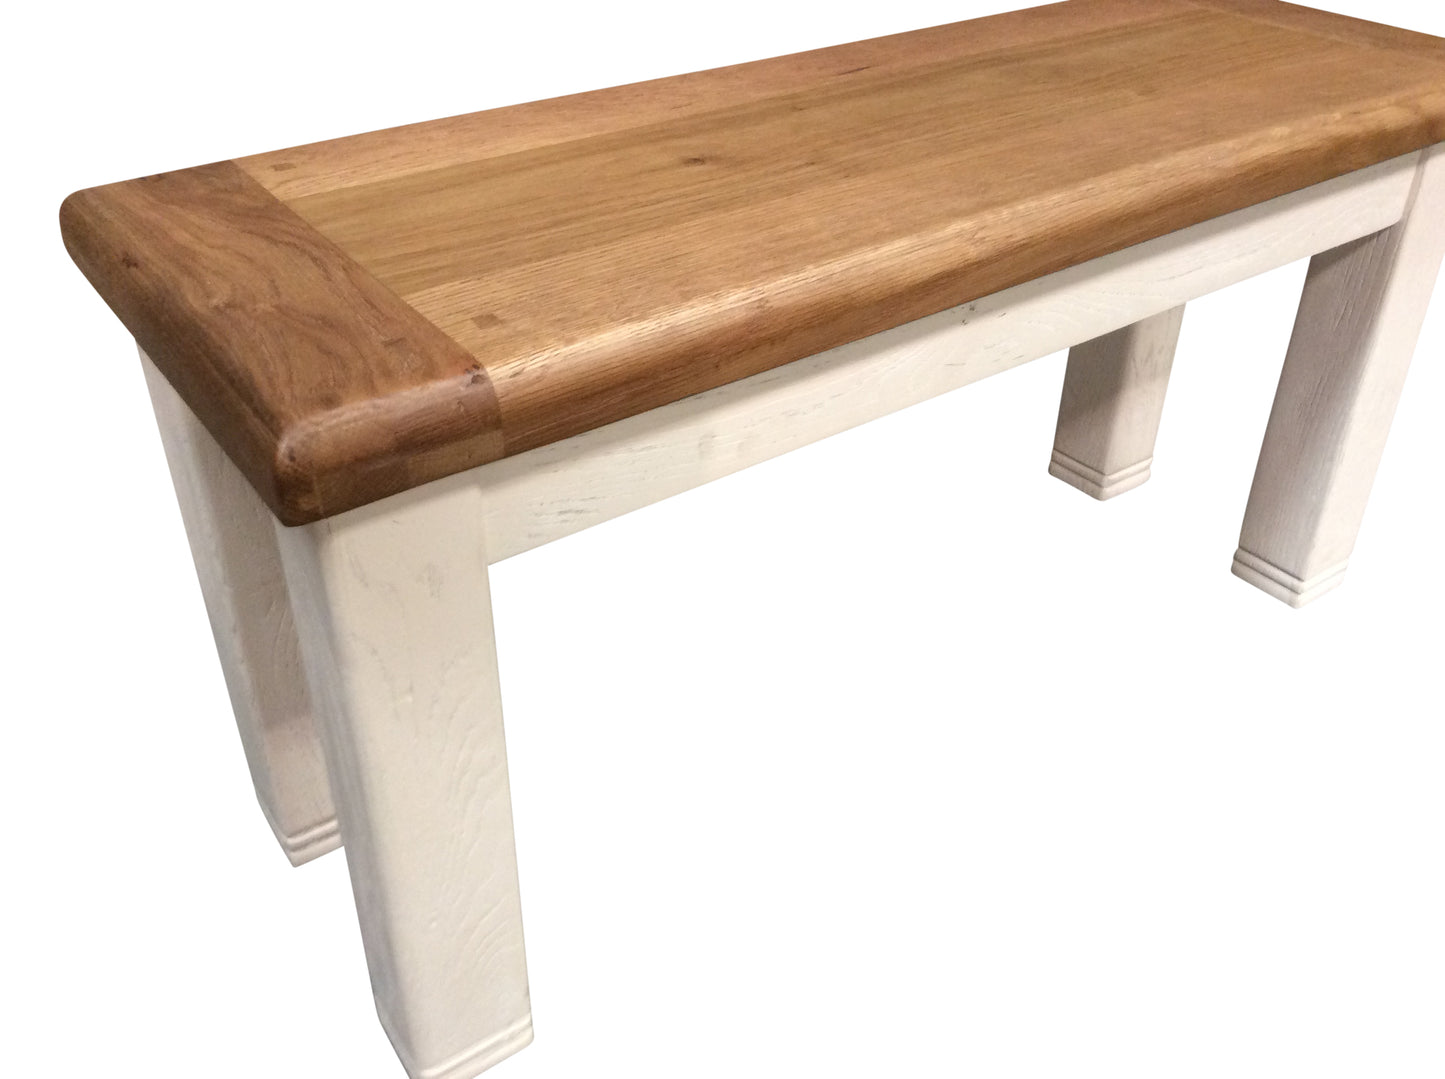 Danube 1m Oak Bench Painted Off-White